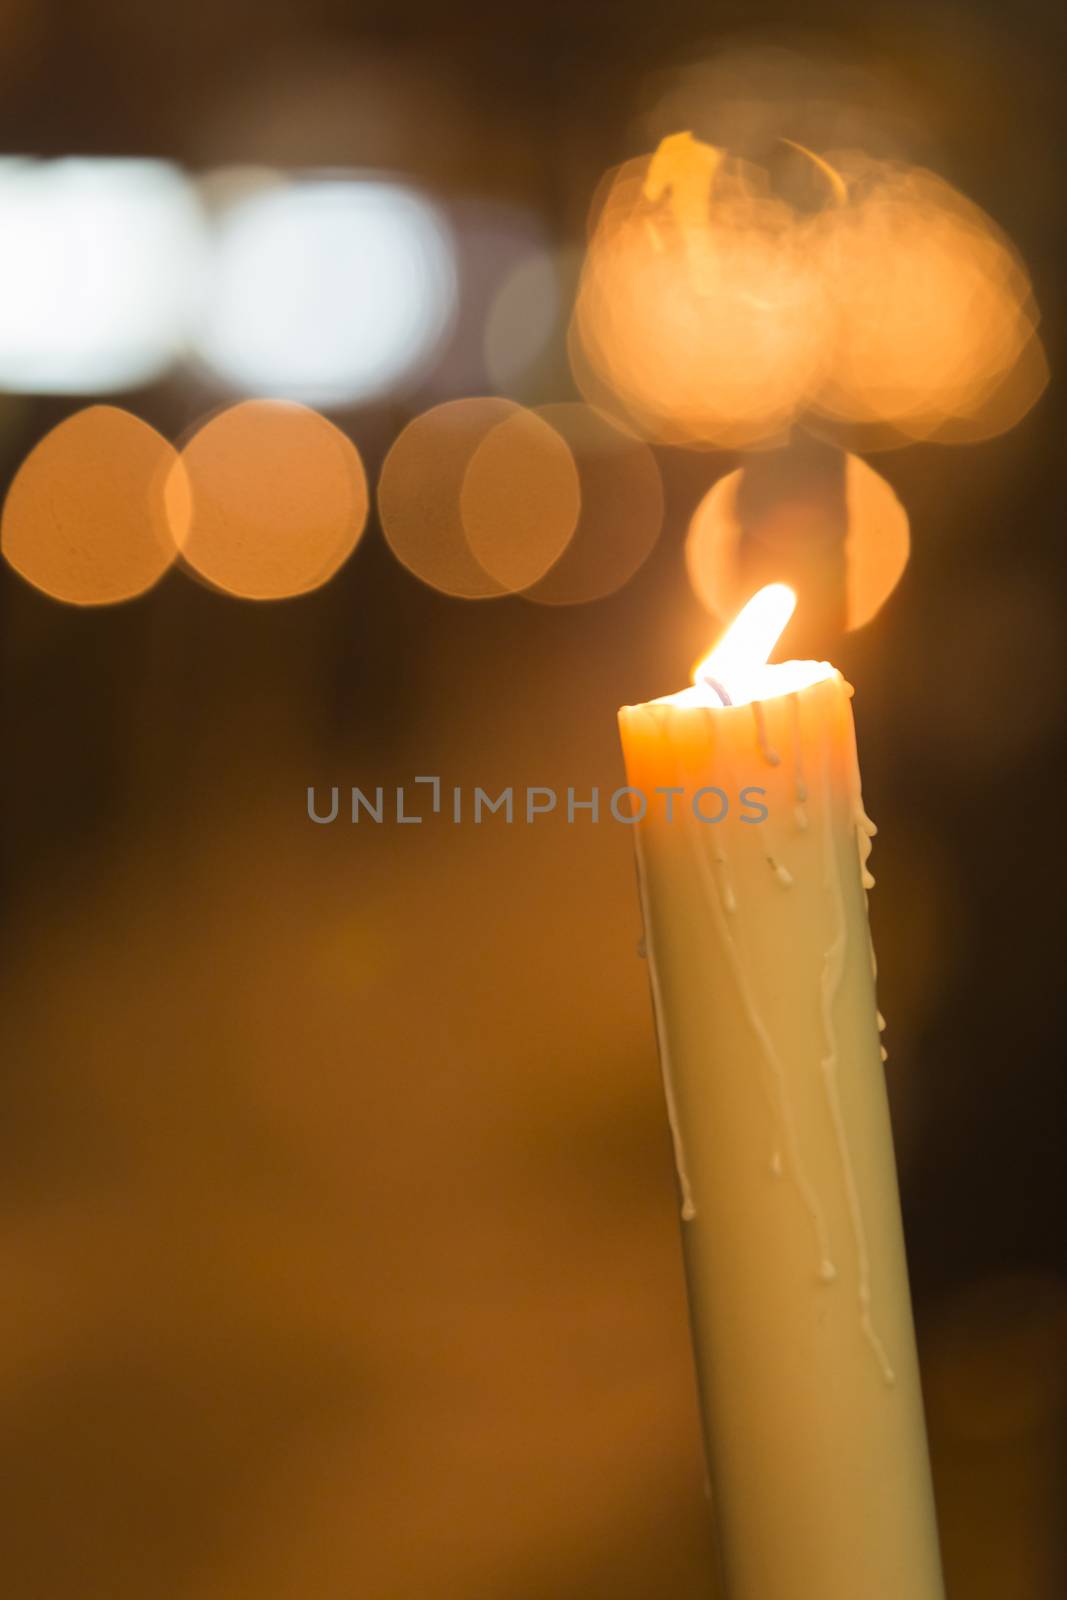 Candle light with light bokeh in the background